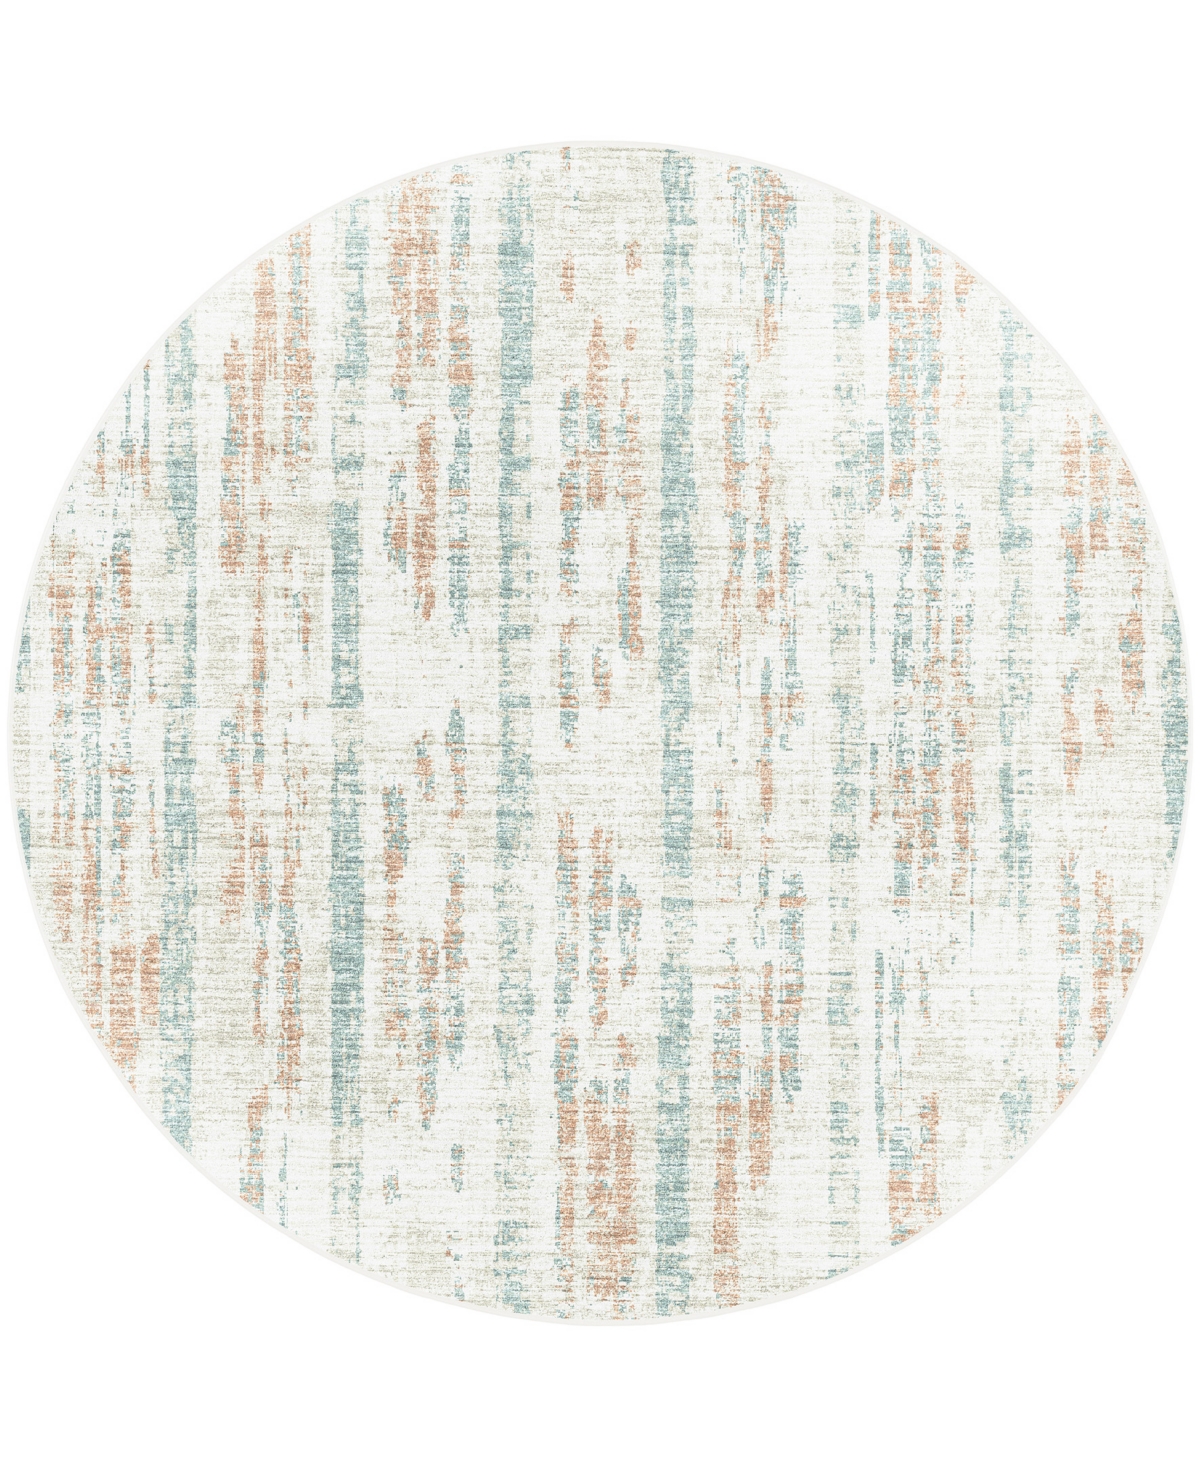 D Style Briggs Brg-6 10' x 10' Round Area Rug - Ivory